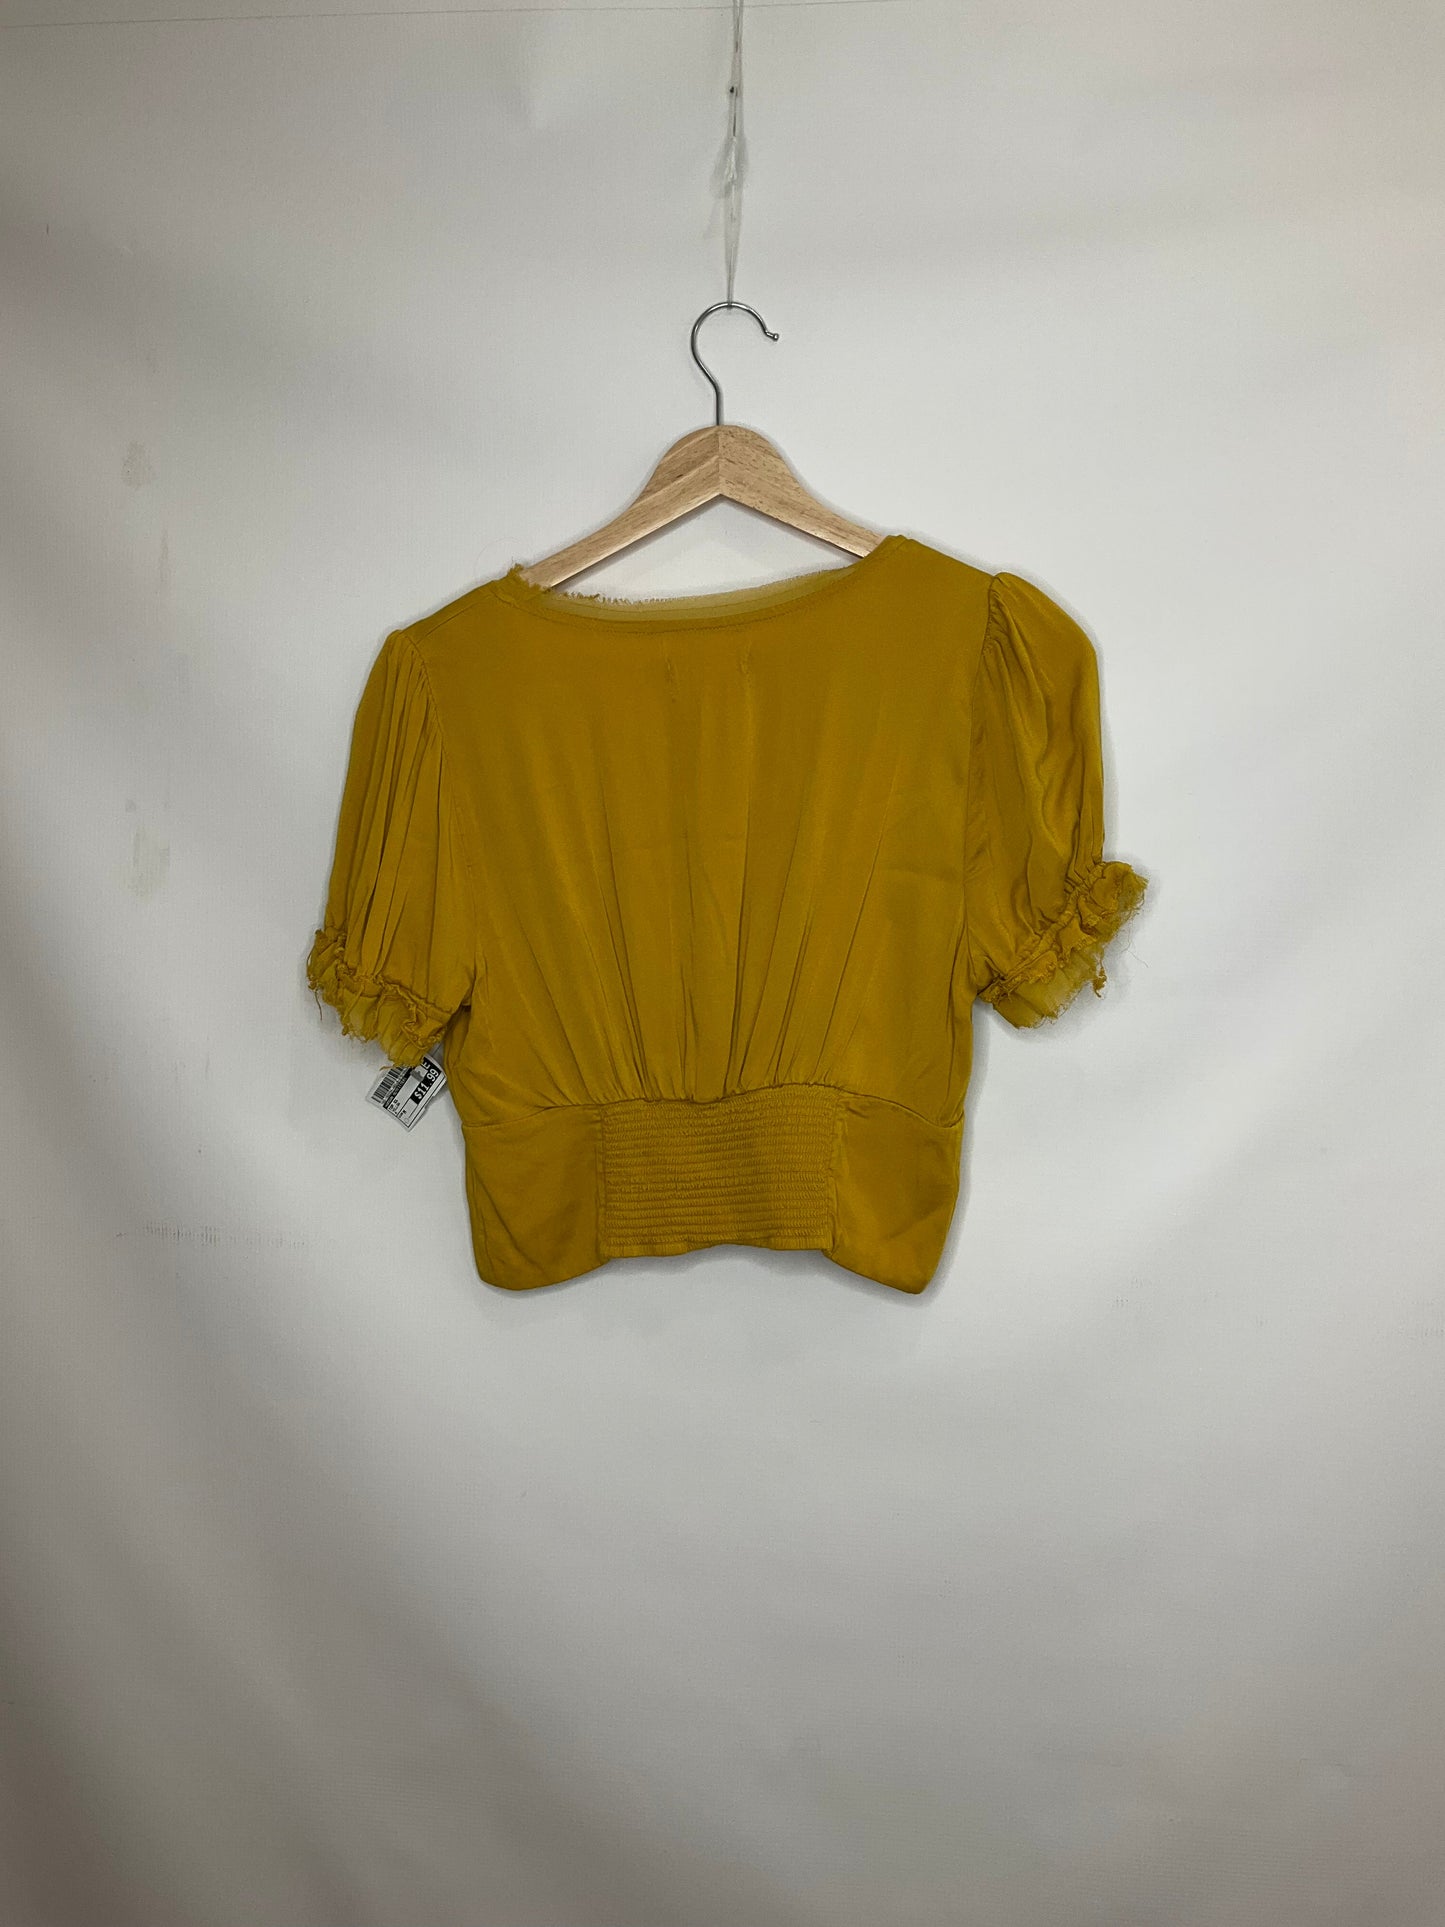 Yellow Top Short Sleeve Urban Outfitters, Size M